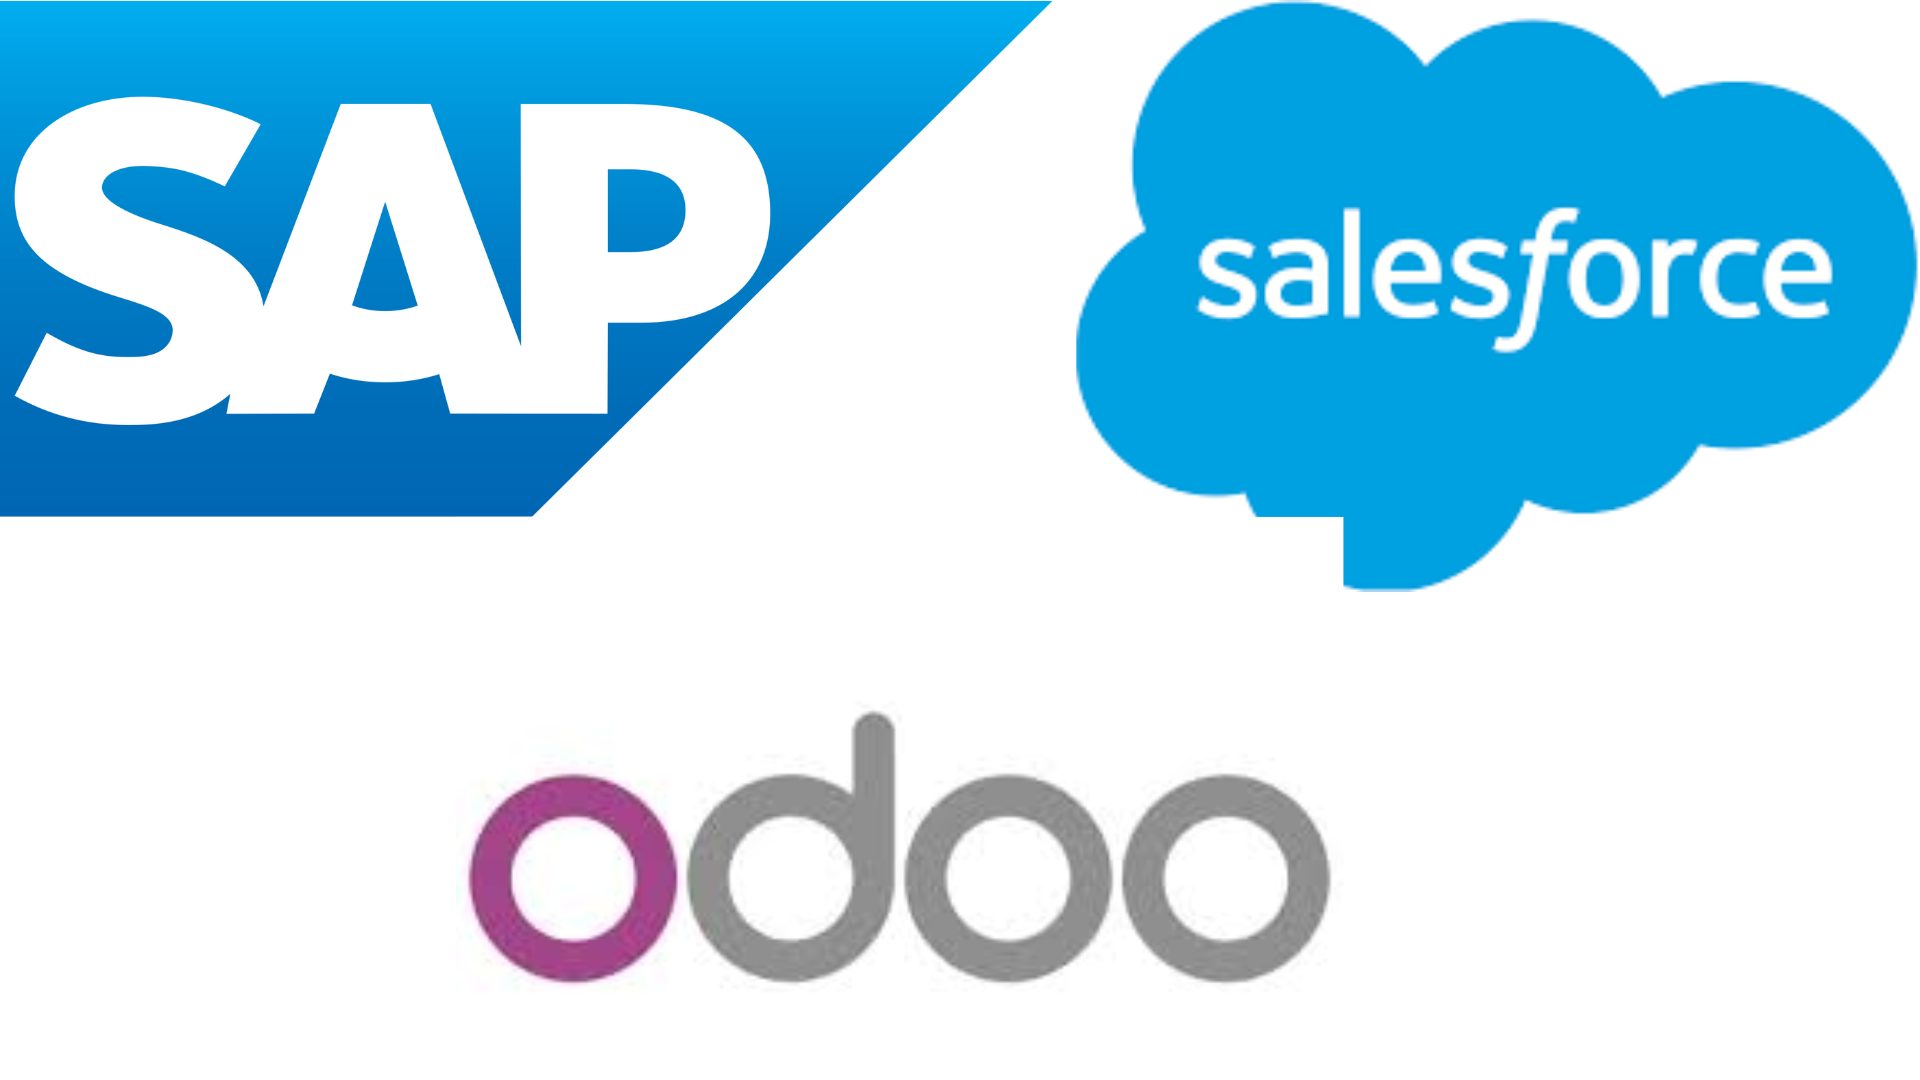 In-Depth Analysis of Odoo, SAP, and Salesforce: ERP and CRM Solutions for Modern Businesses